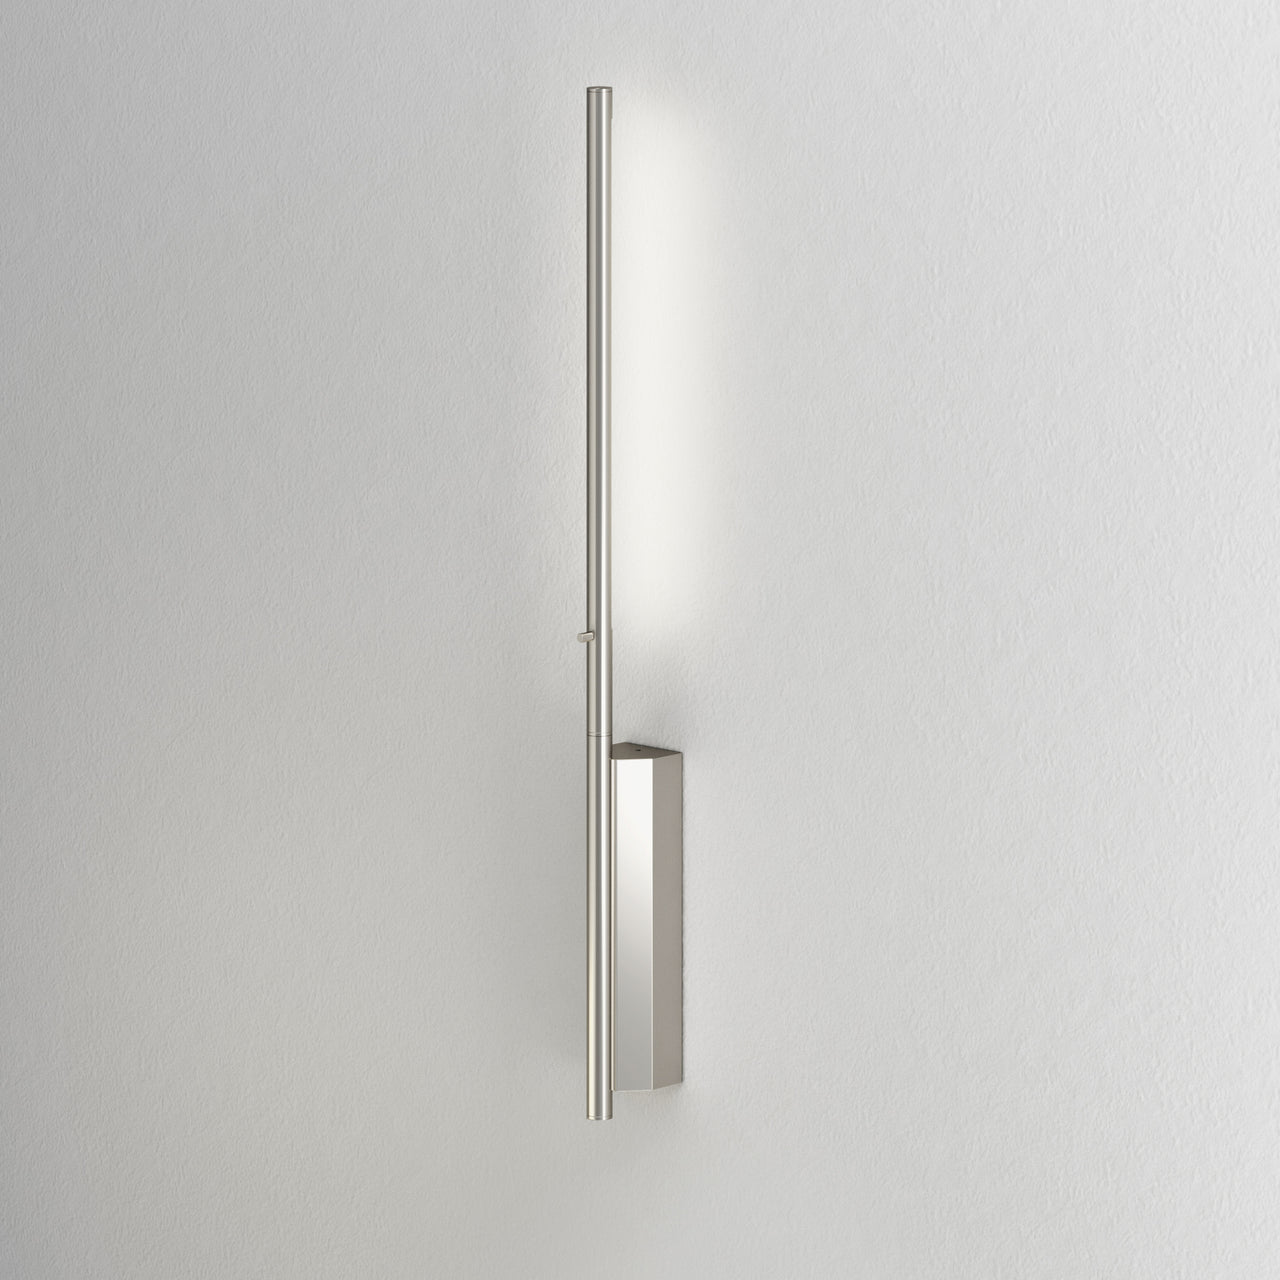 IP Link Reading Wall Light: Small